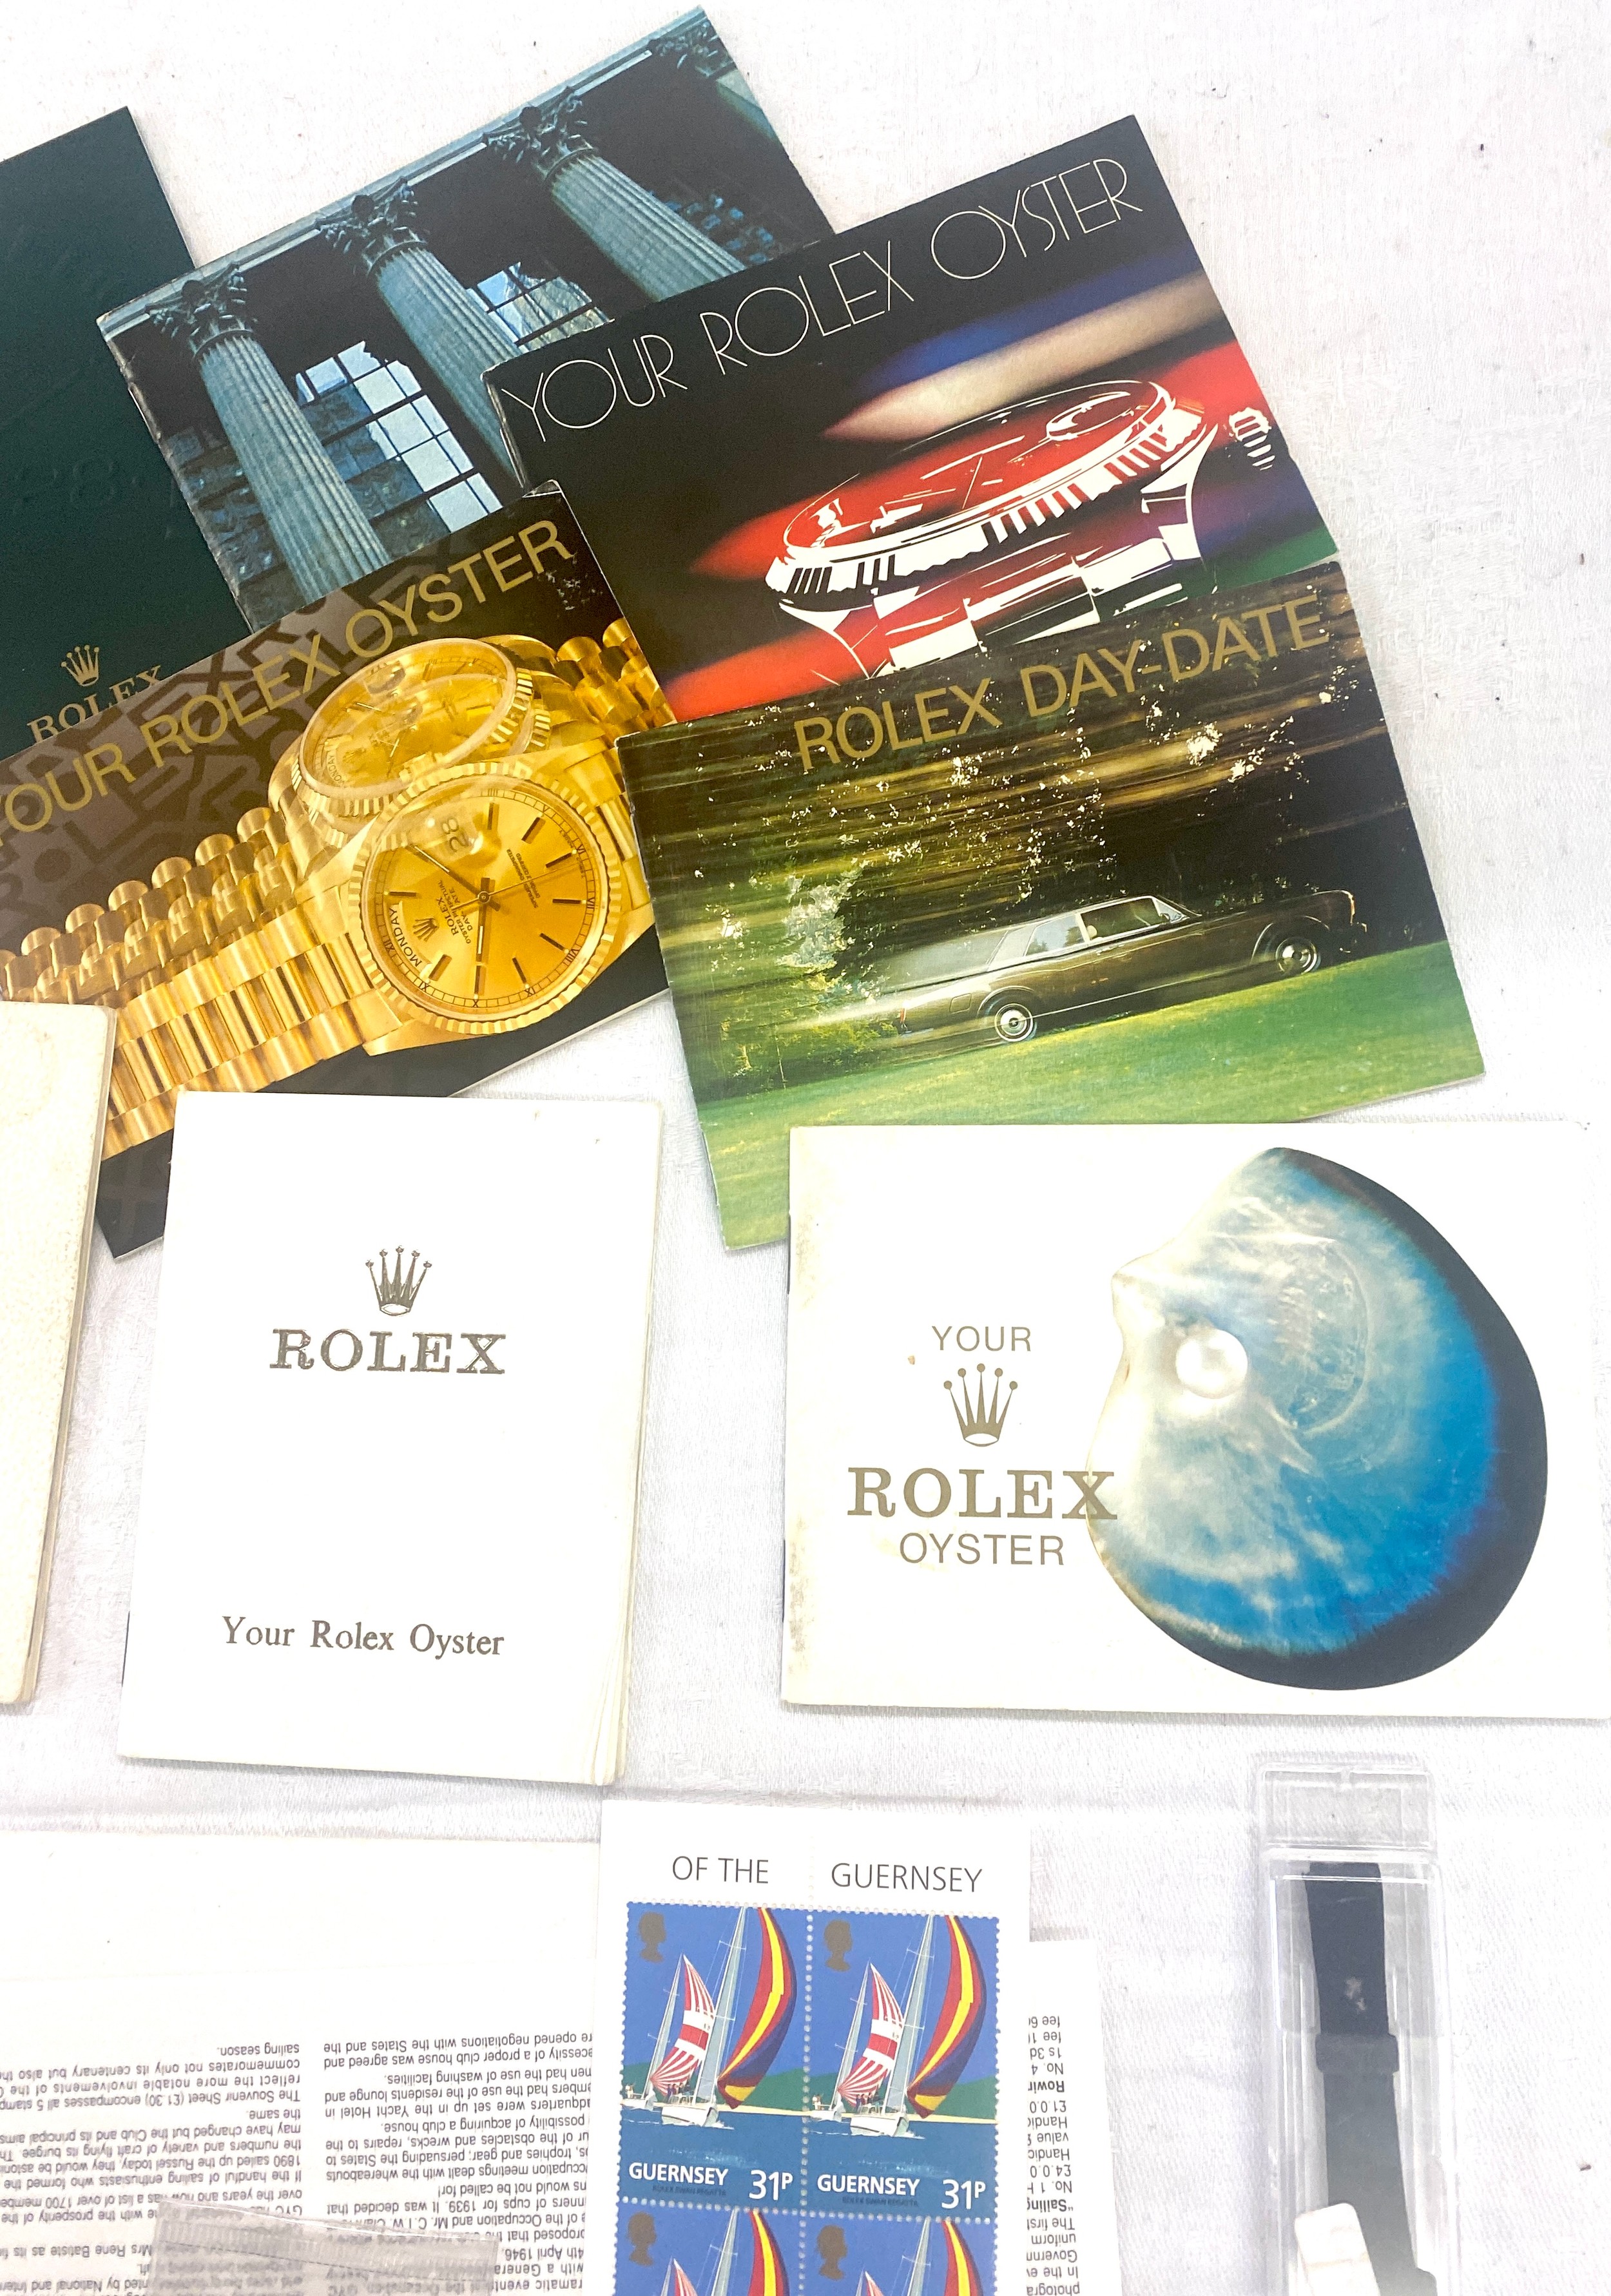 Selection of original Rolex collectable pieces to include Rolex manuals, ladies leather Rolex strap, - Image 4 of 5